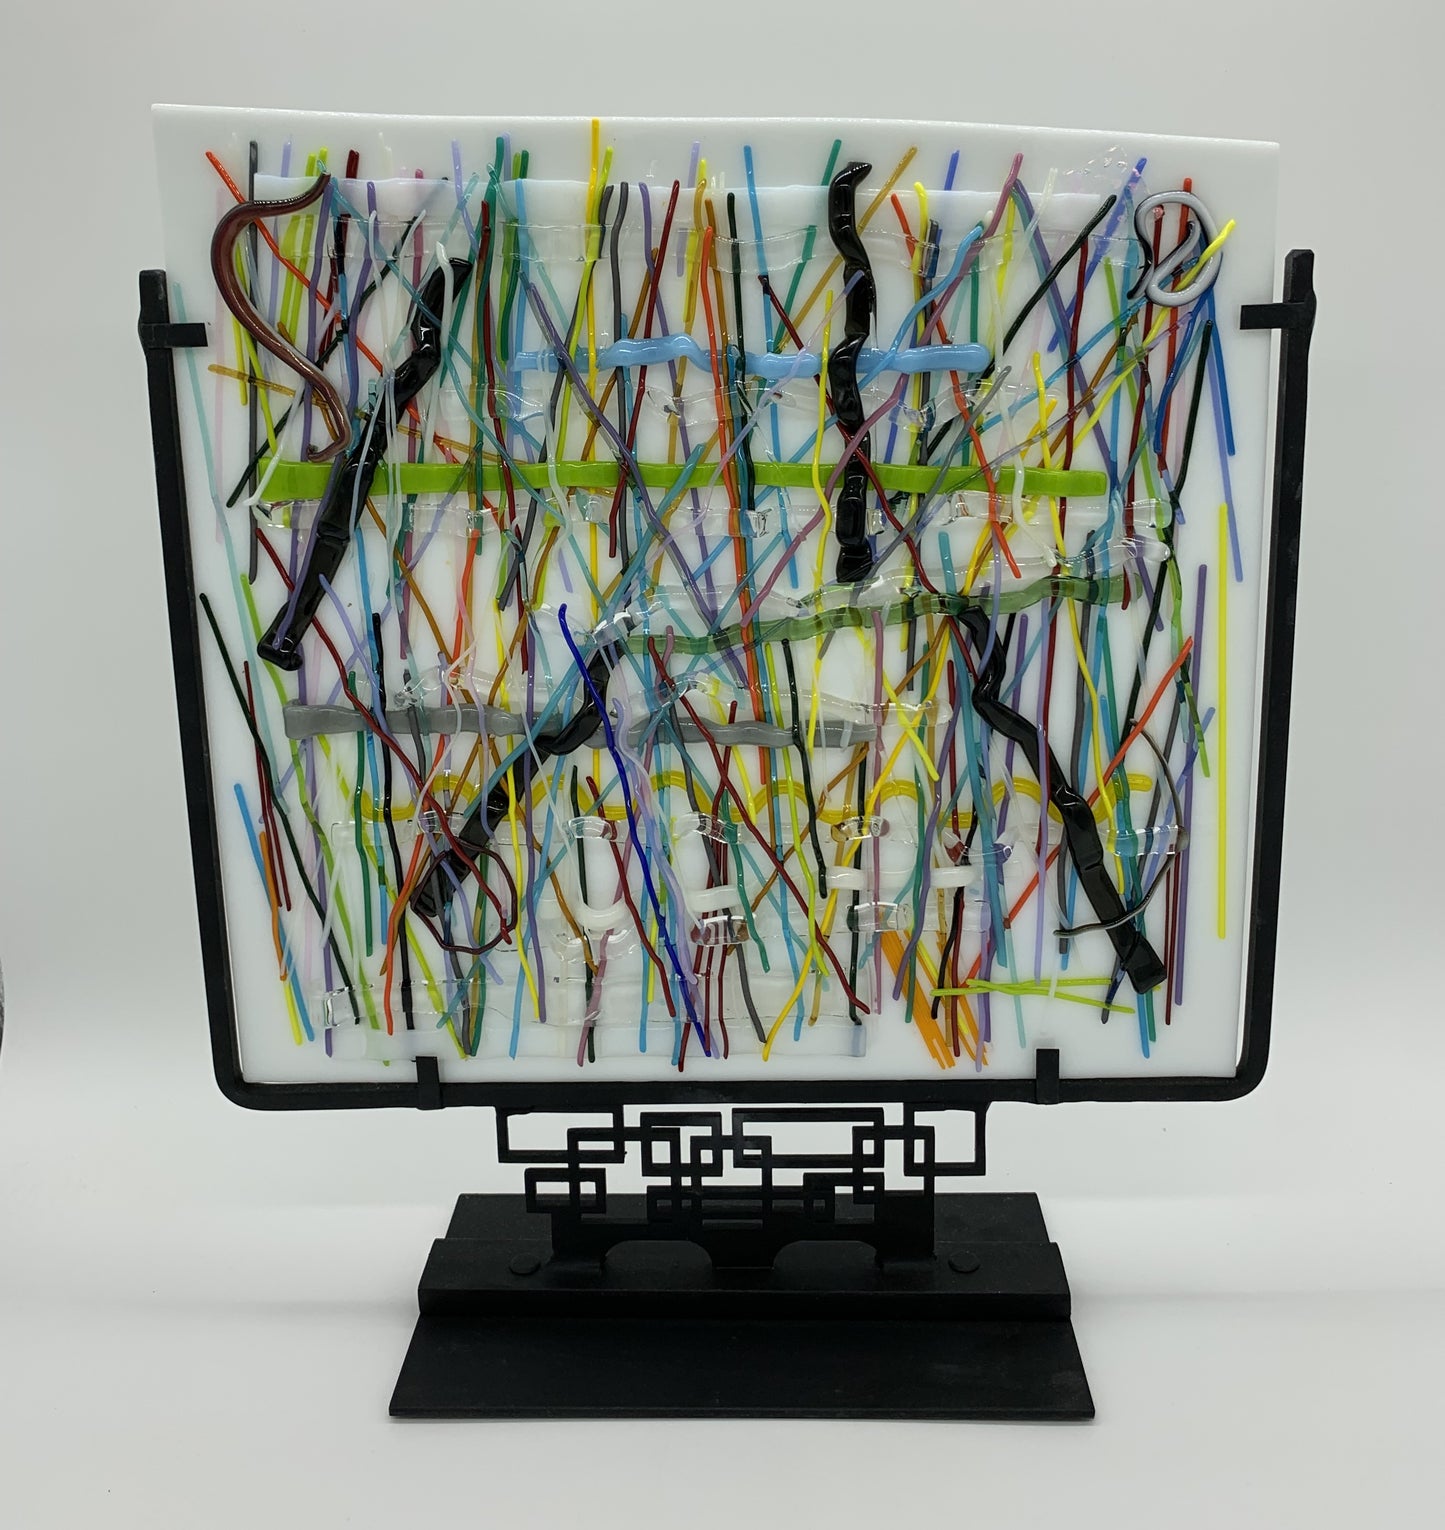 Glass on Stand - Multiple Colors on White